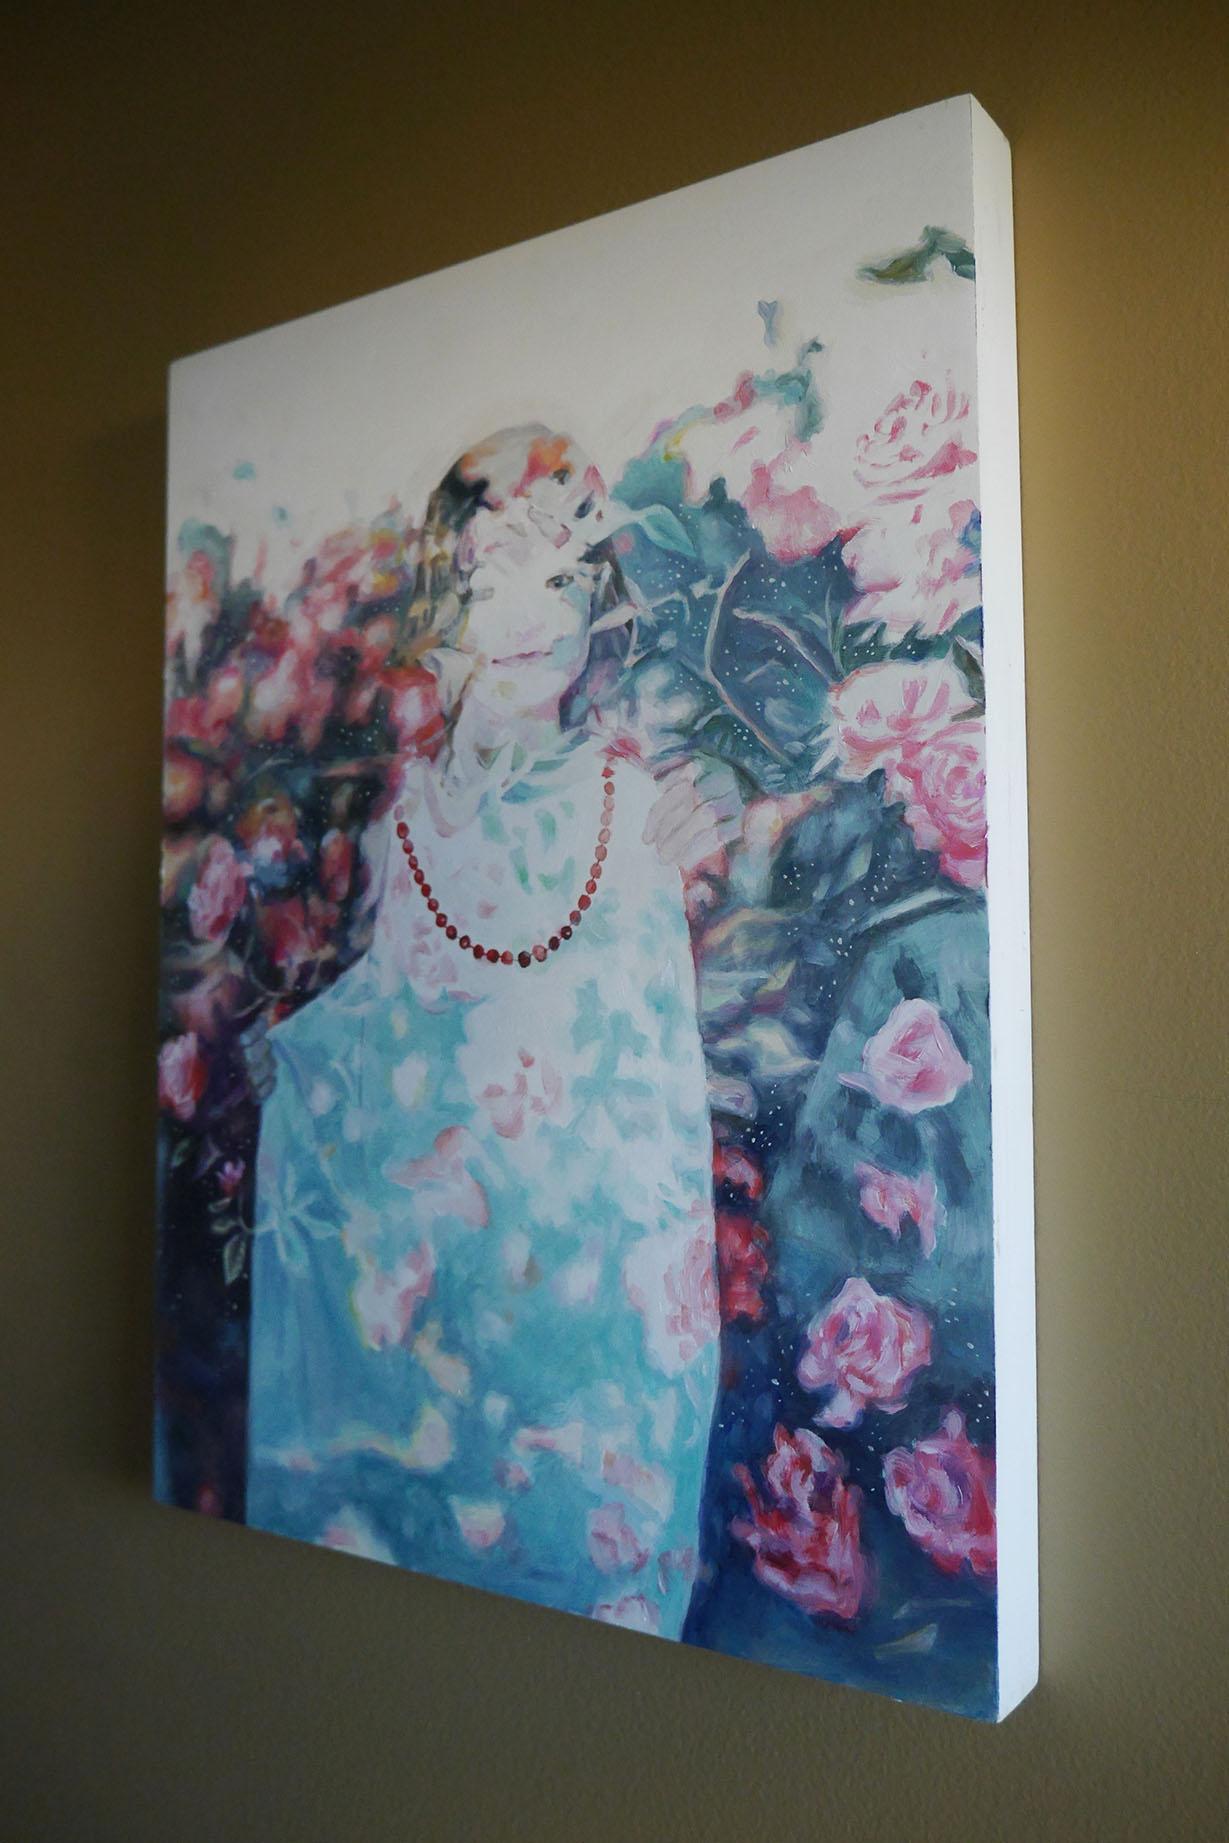 <p>Artist Comments<br>Artist Kristen Brown depicts an ethereal translucent shape of a young girl in a dress. Overlapping imagery of flowers and plant matter merge with the figure, obscuring the boundary between place and time, evoking a sense of